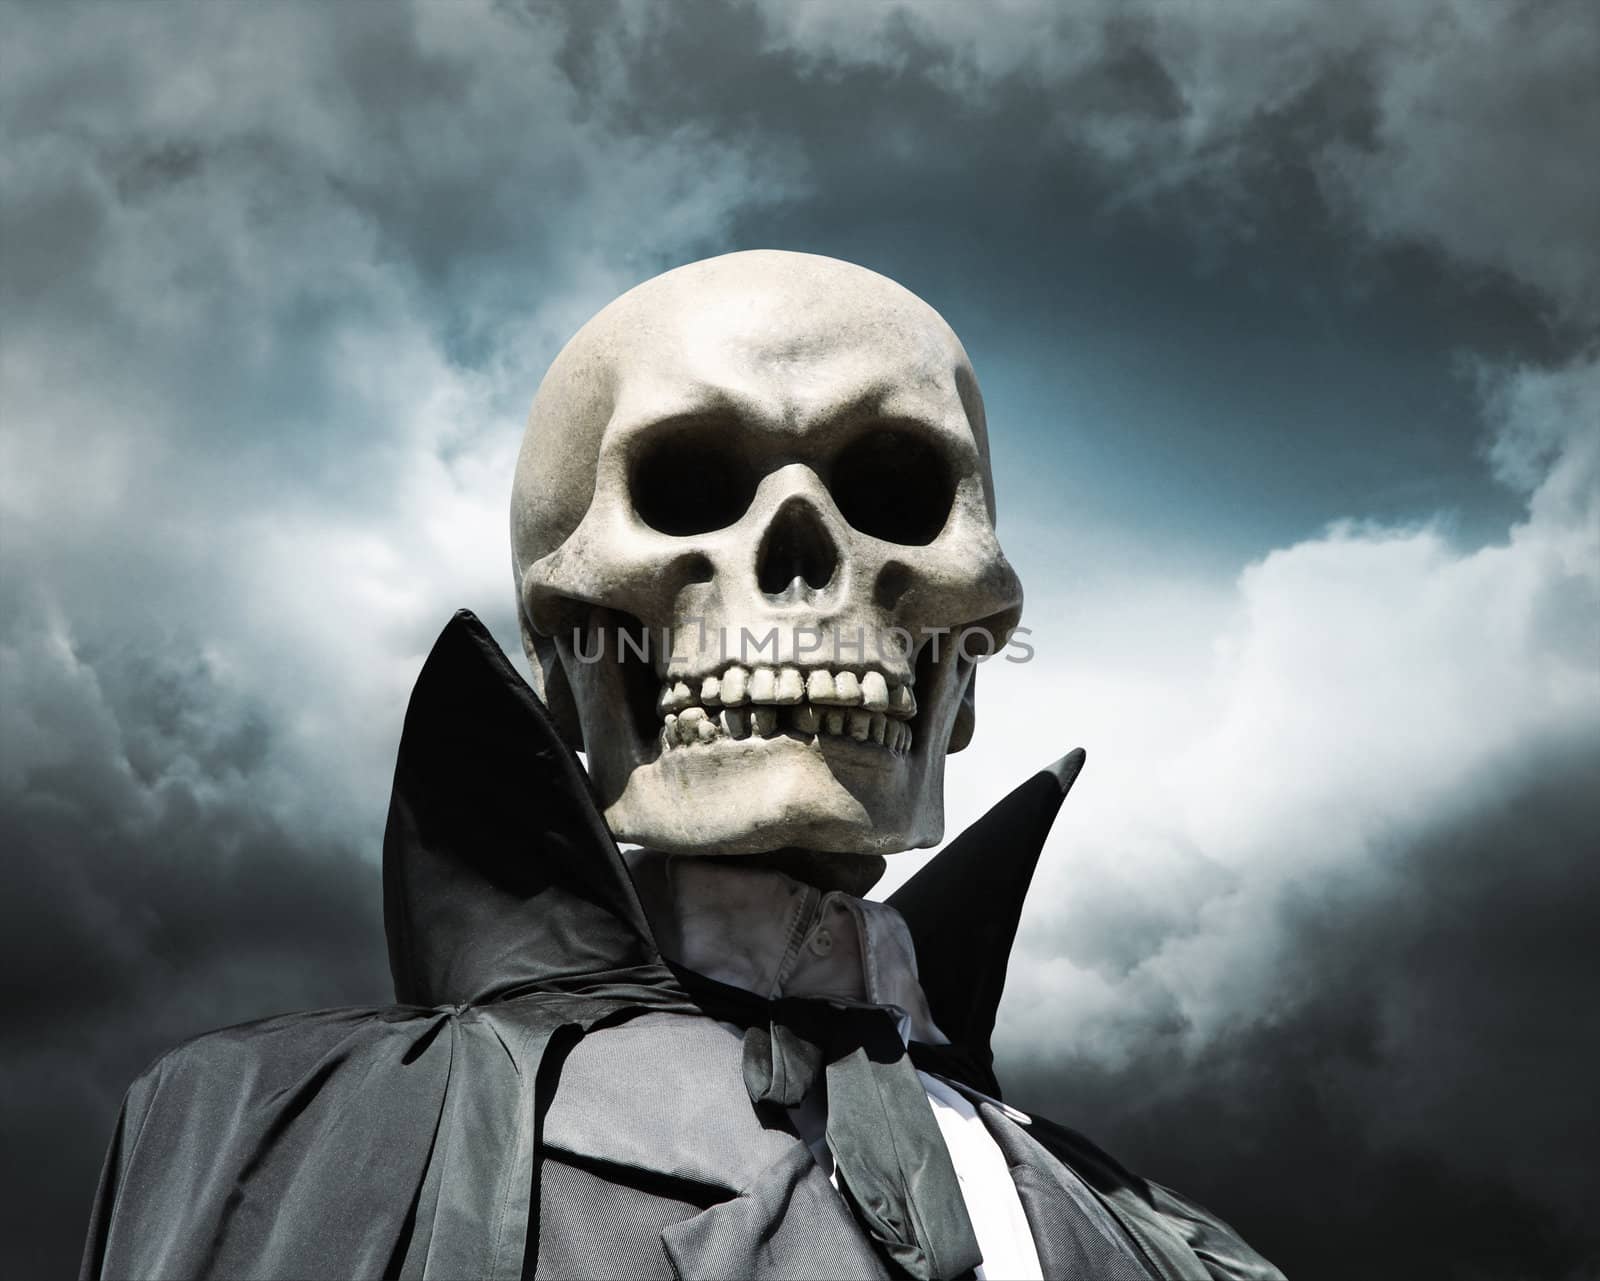 grim reaper. death's skeleton on a cloudy dramatic sky by daboost